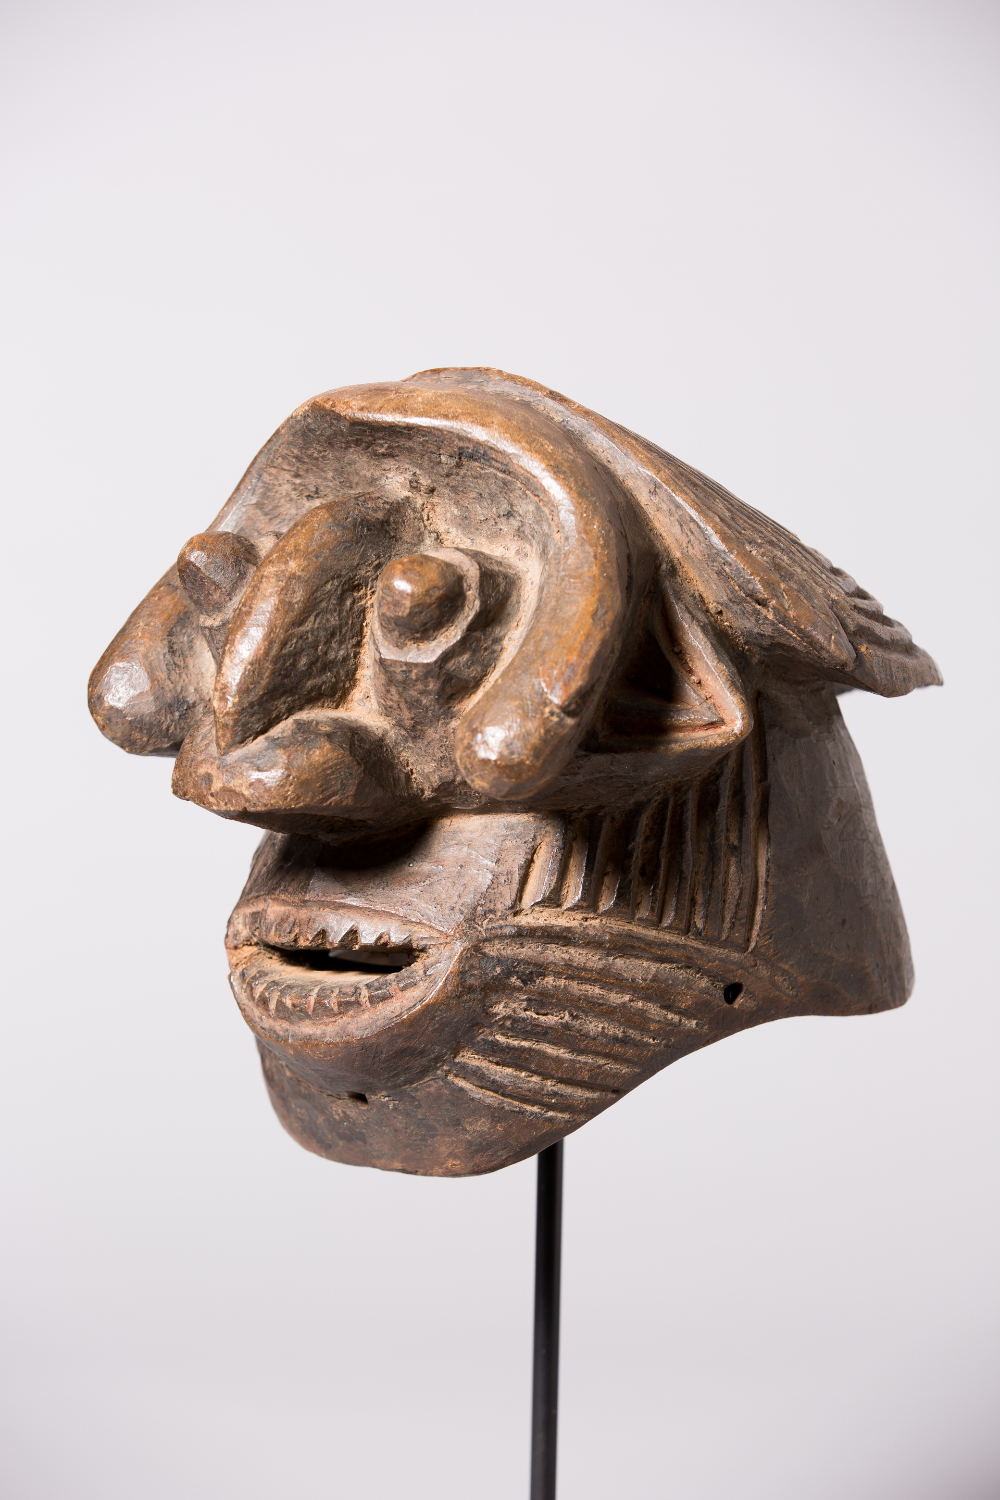 thumbnail of Male Leader Mask from Western Grassfields: Wum. medium: Wood. date: early 20th century